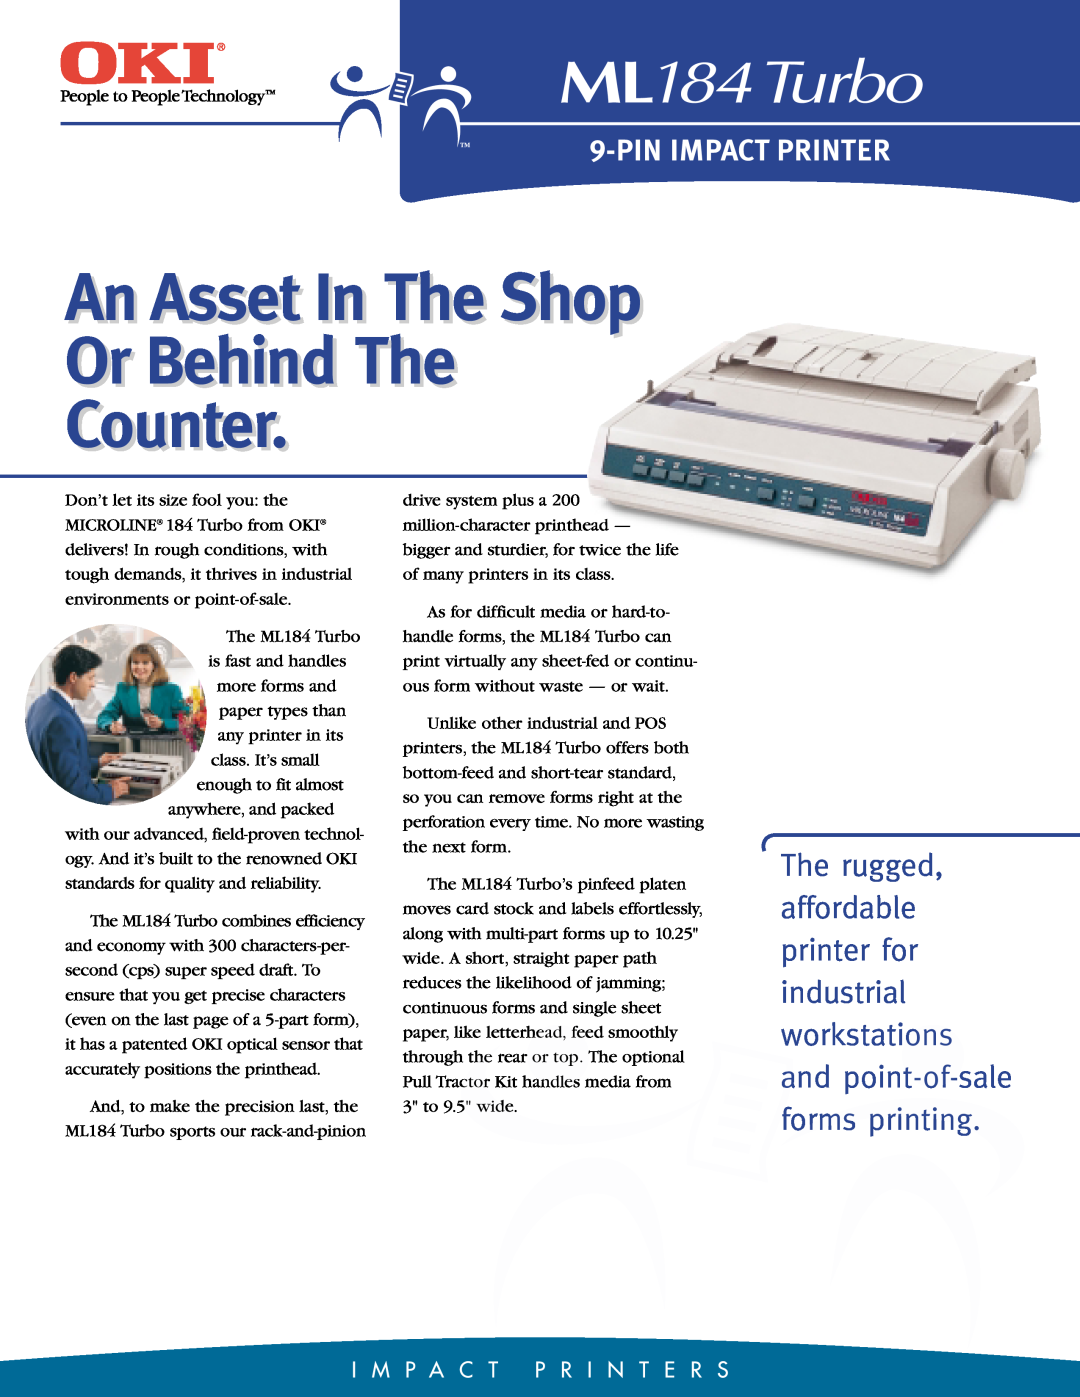 Oki manual An Asset In The Shop Or Behind The Counter, ML184Turbo, Pin Impact Printer, and point-of-sale forms printing 